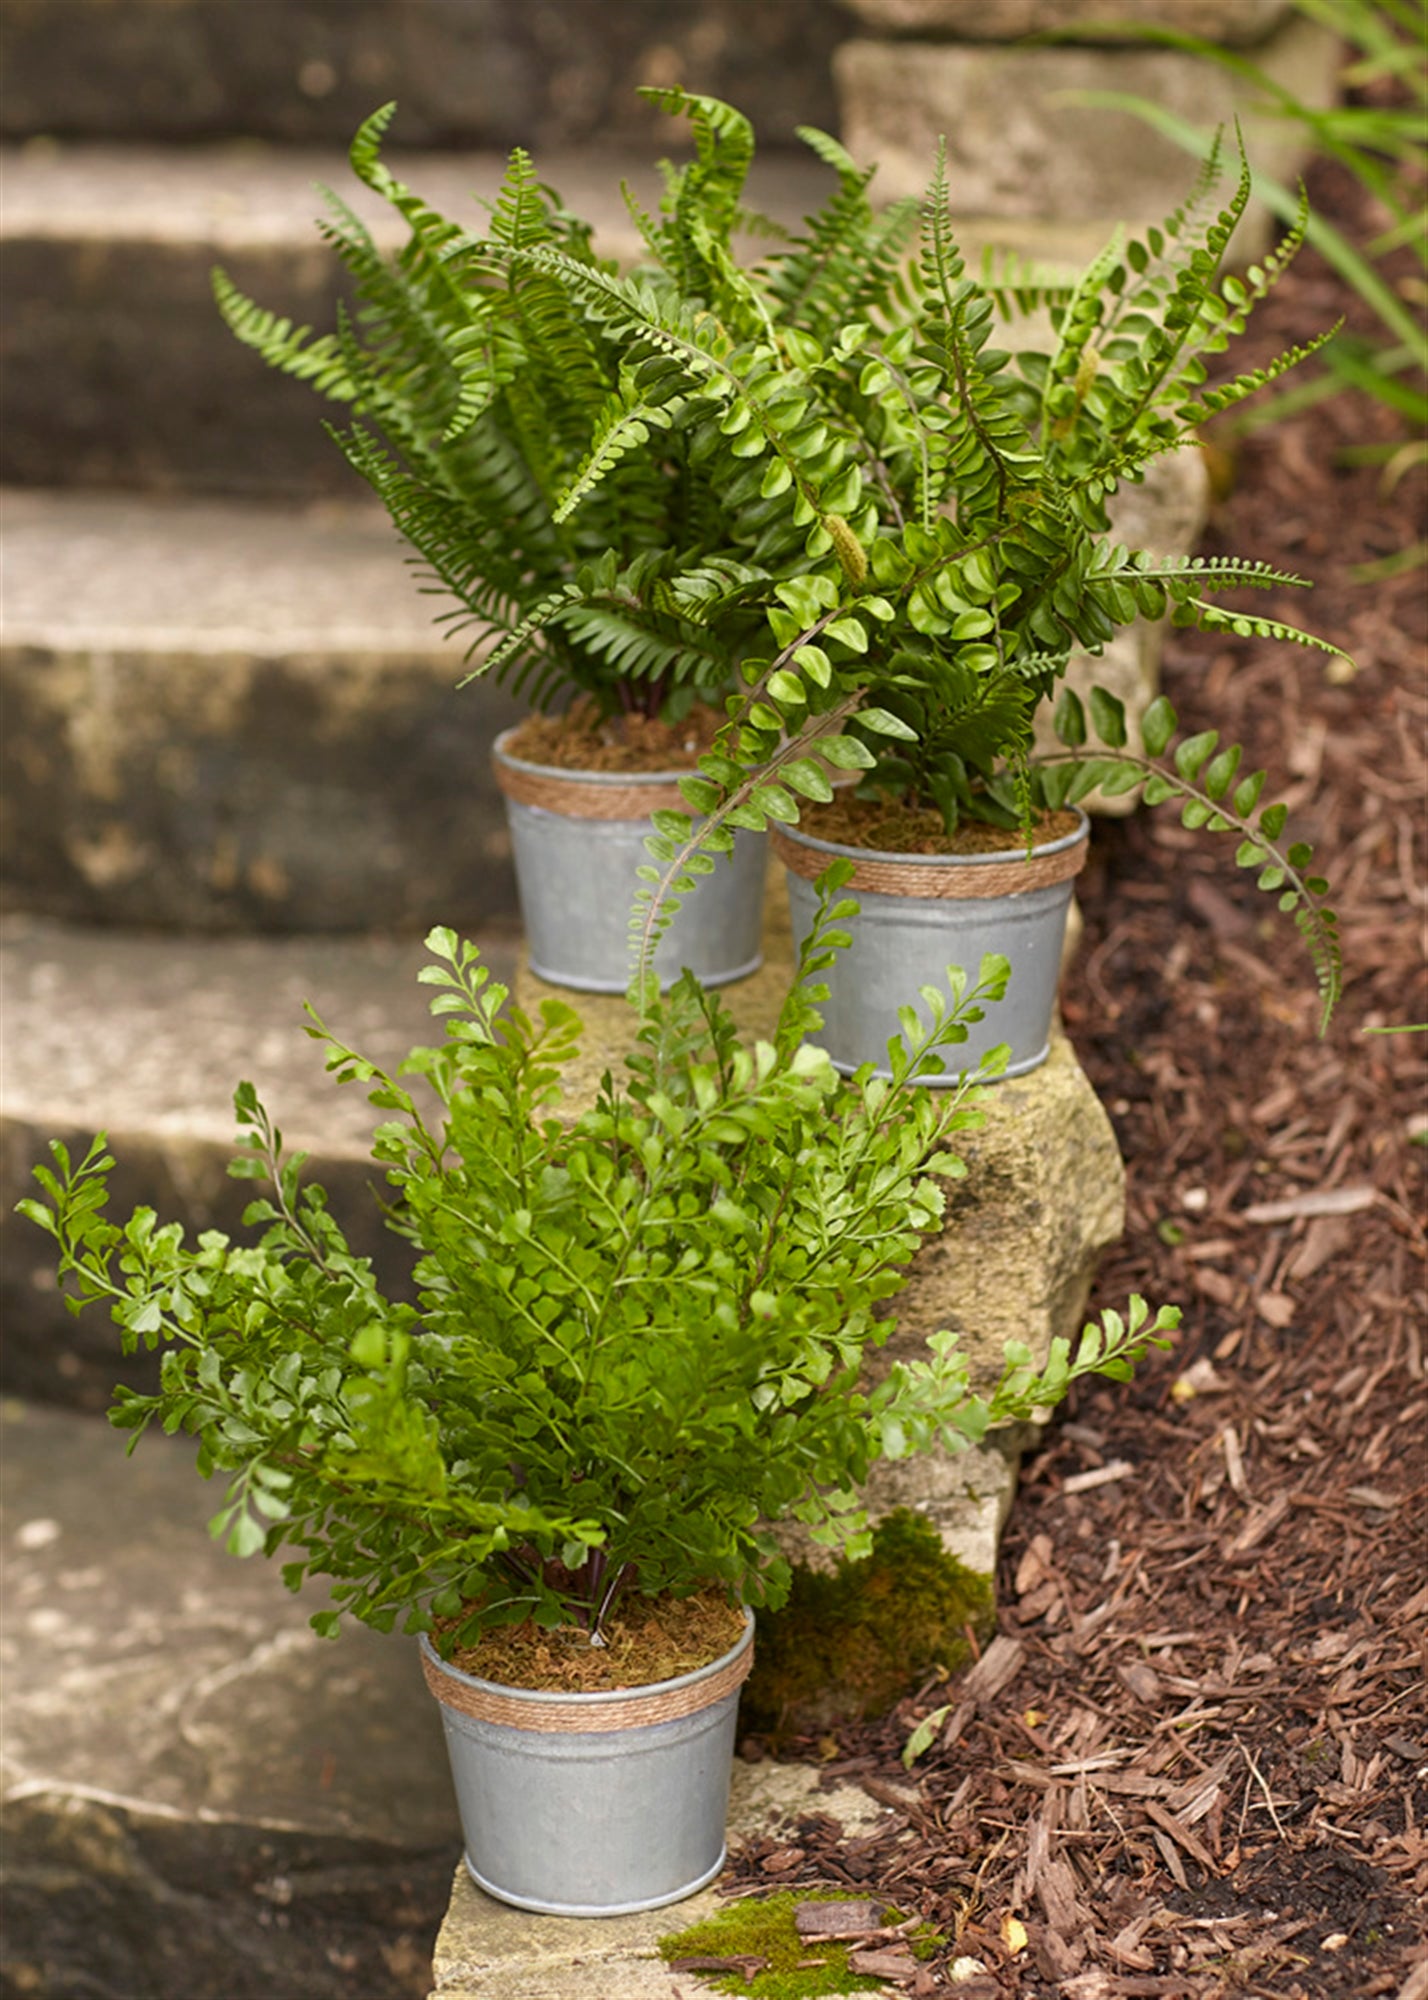 Potted Fern (Set of 3) 14.5"H Plastic/Tin